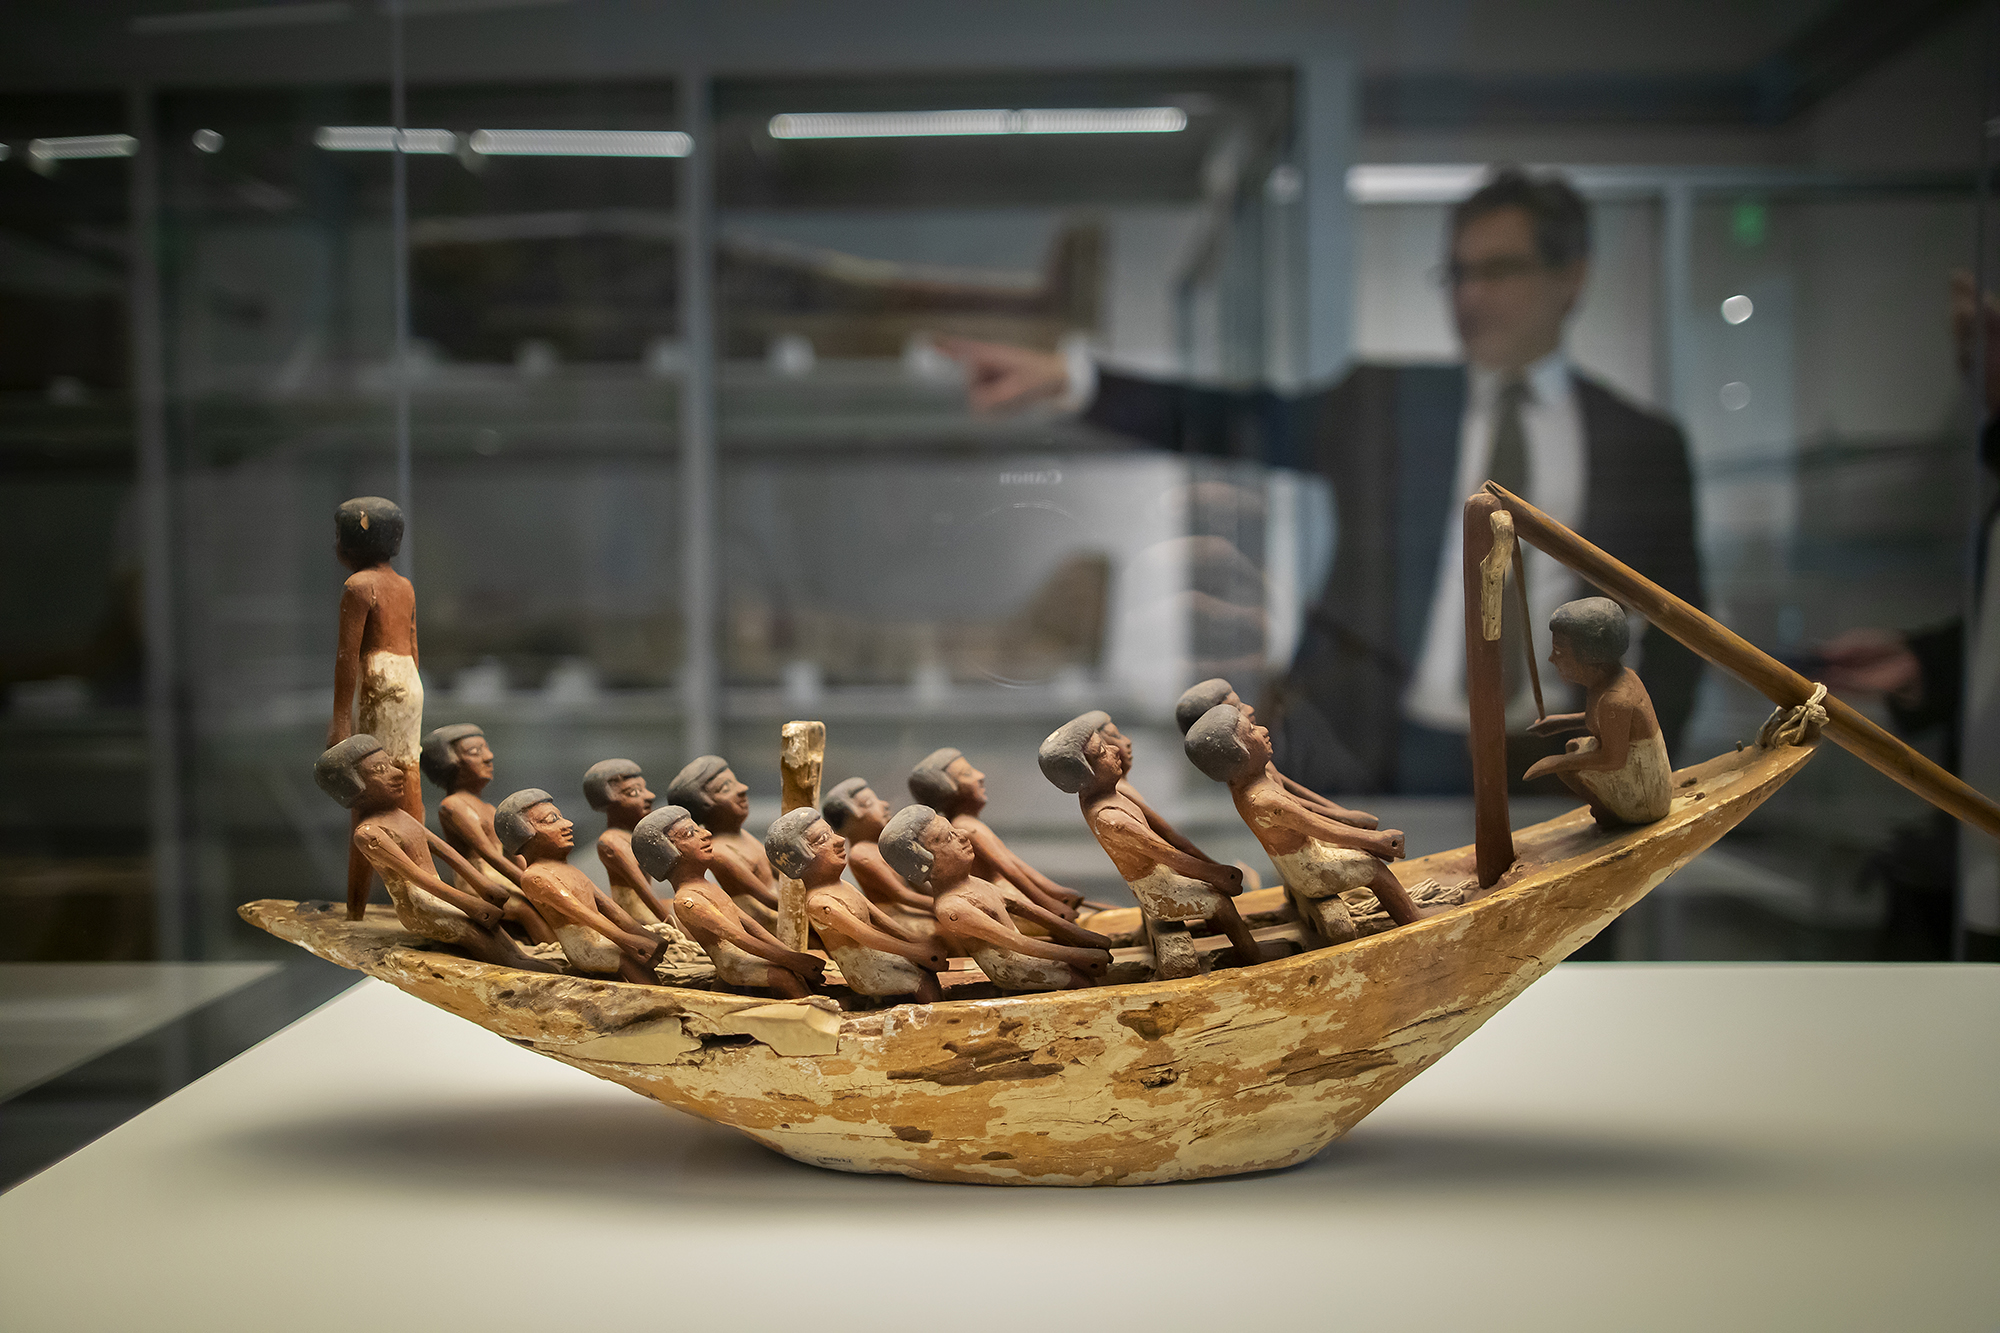 a 4,000-year-old model of a rowing boat featuring 16 figures